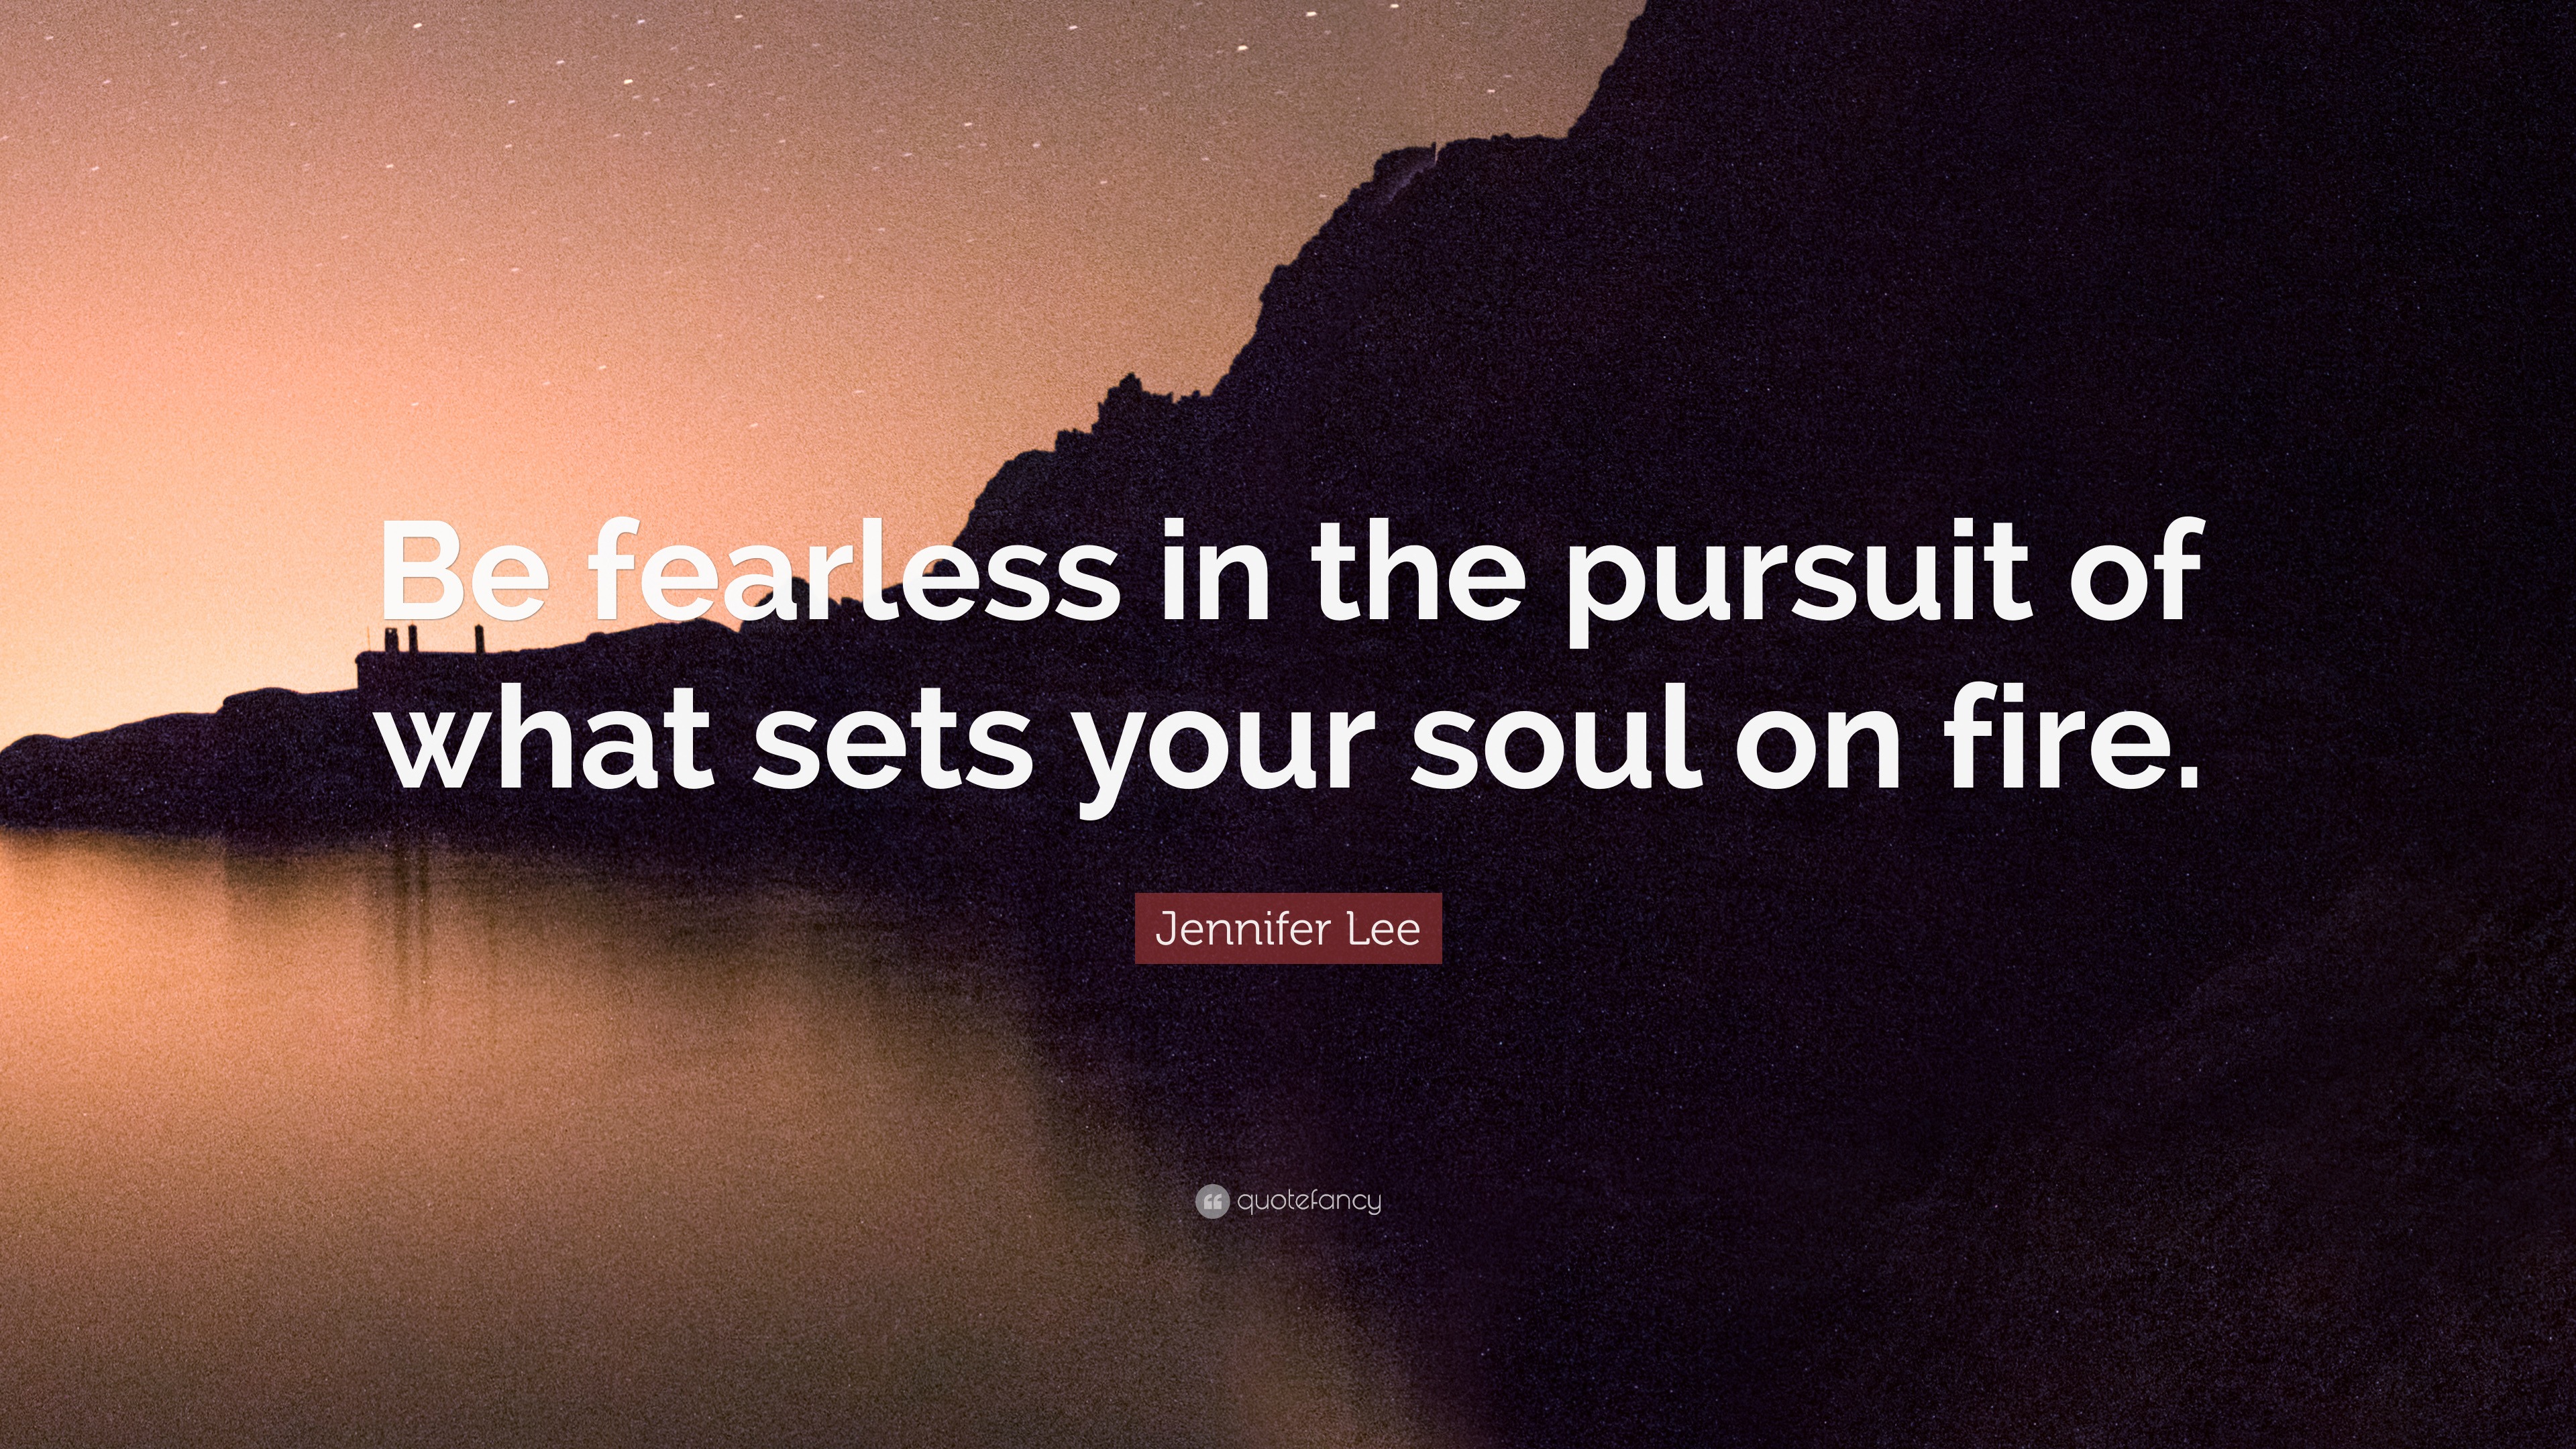 Jennifer Lee Quote: “Be fearless in the pursuit of what sets your soul on  fire.”